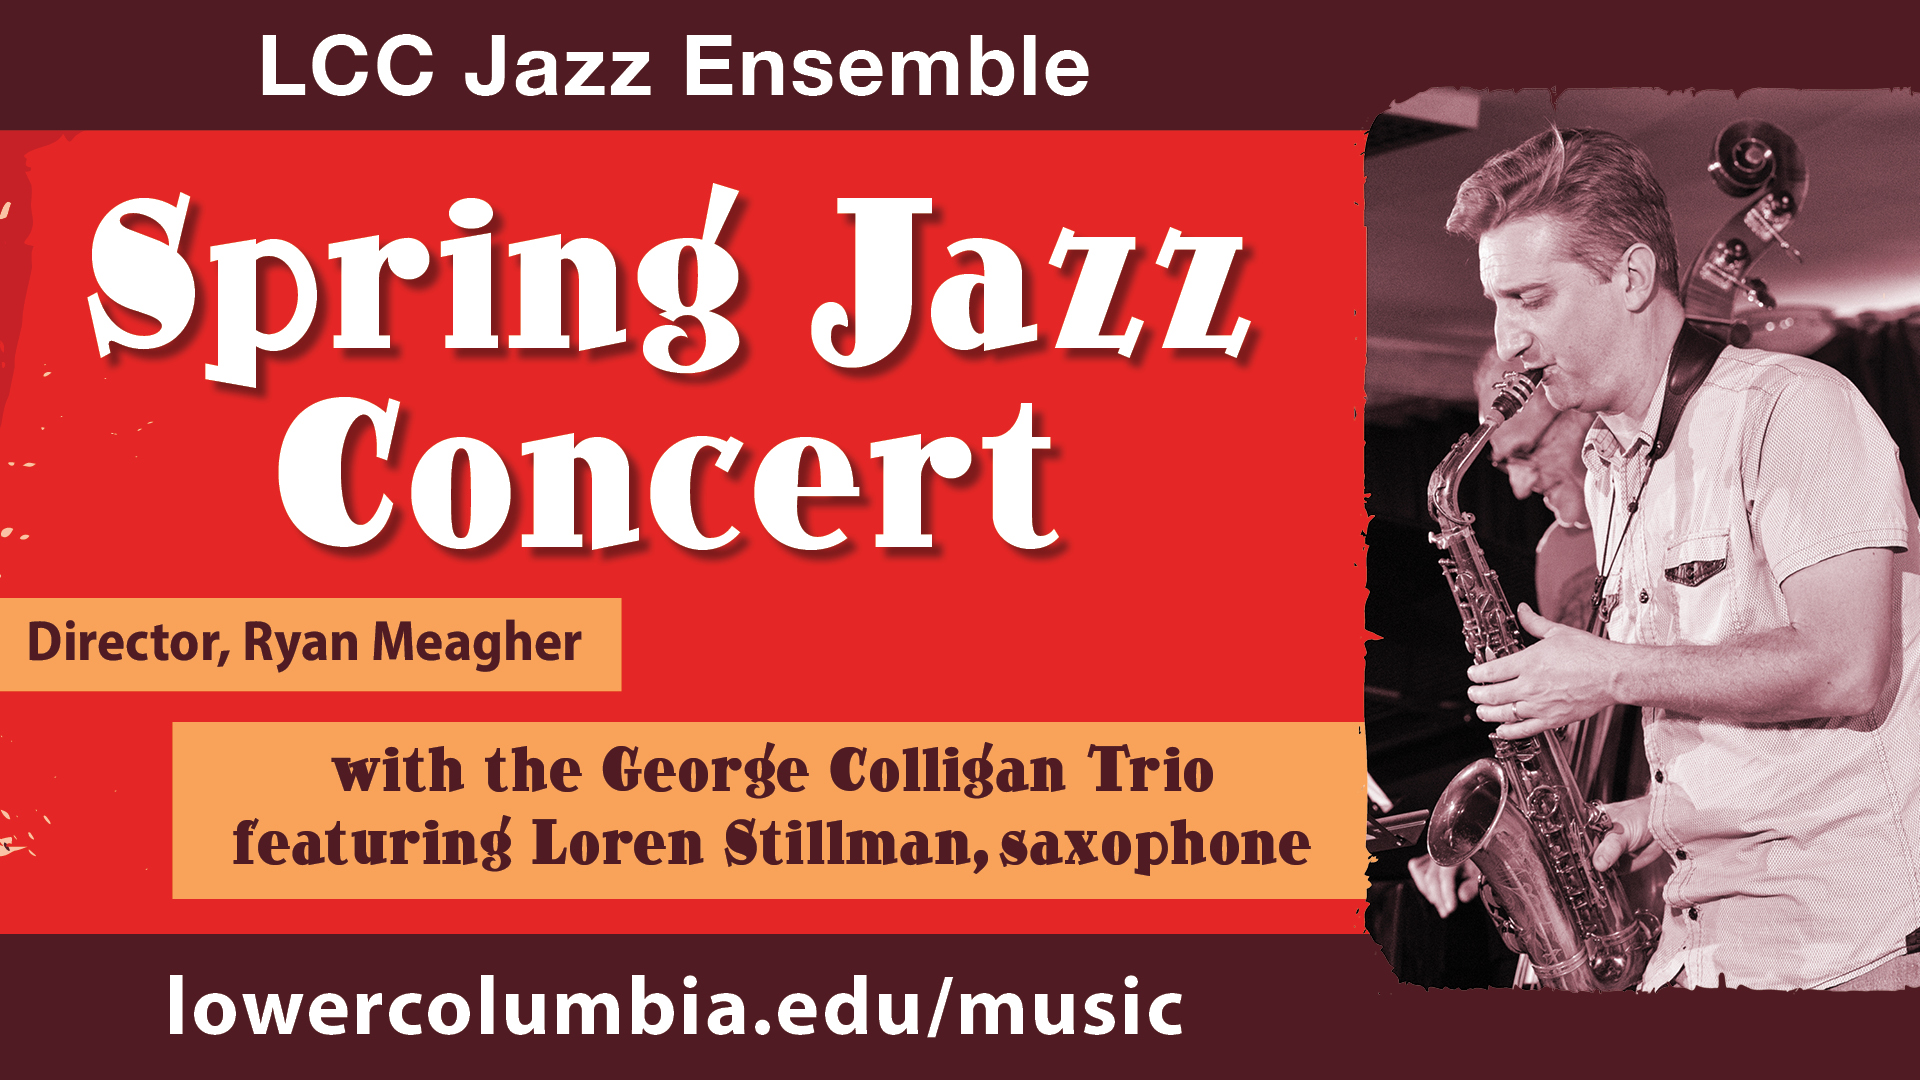 rad background with image of caucasian male playing saxophone. Text saying "LCC Jazz Ensamble; spring jazz concert; Director Ryan Meagher; with the george collagin trio featuring Loren Stillman, Saxophone"